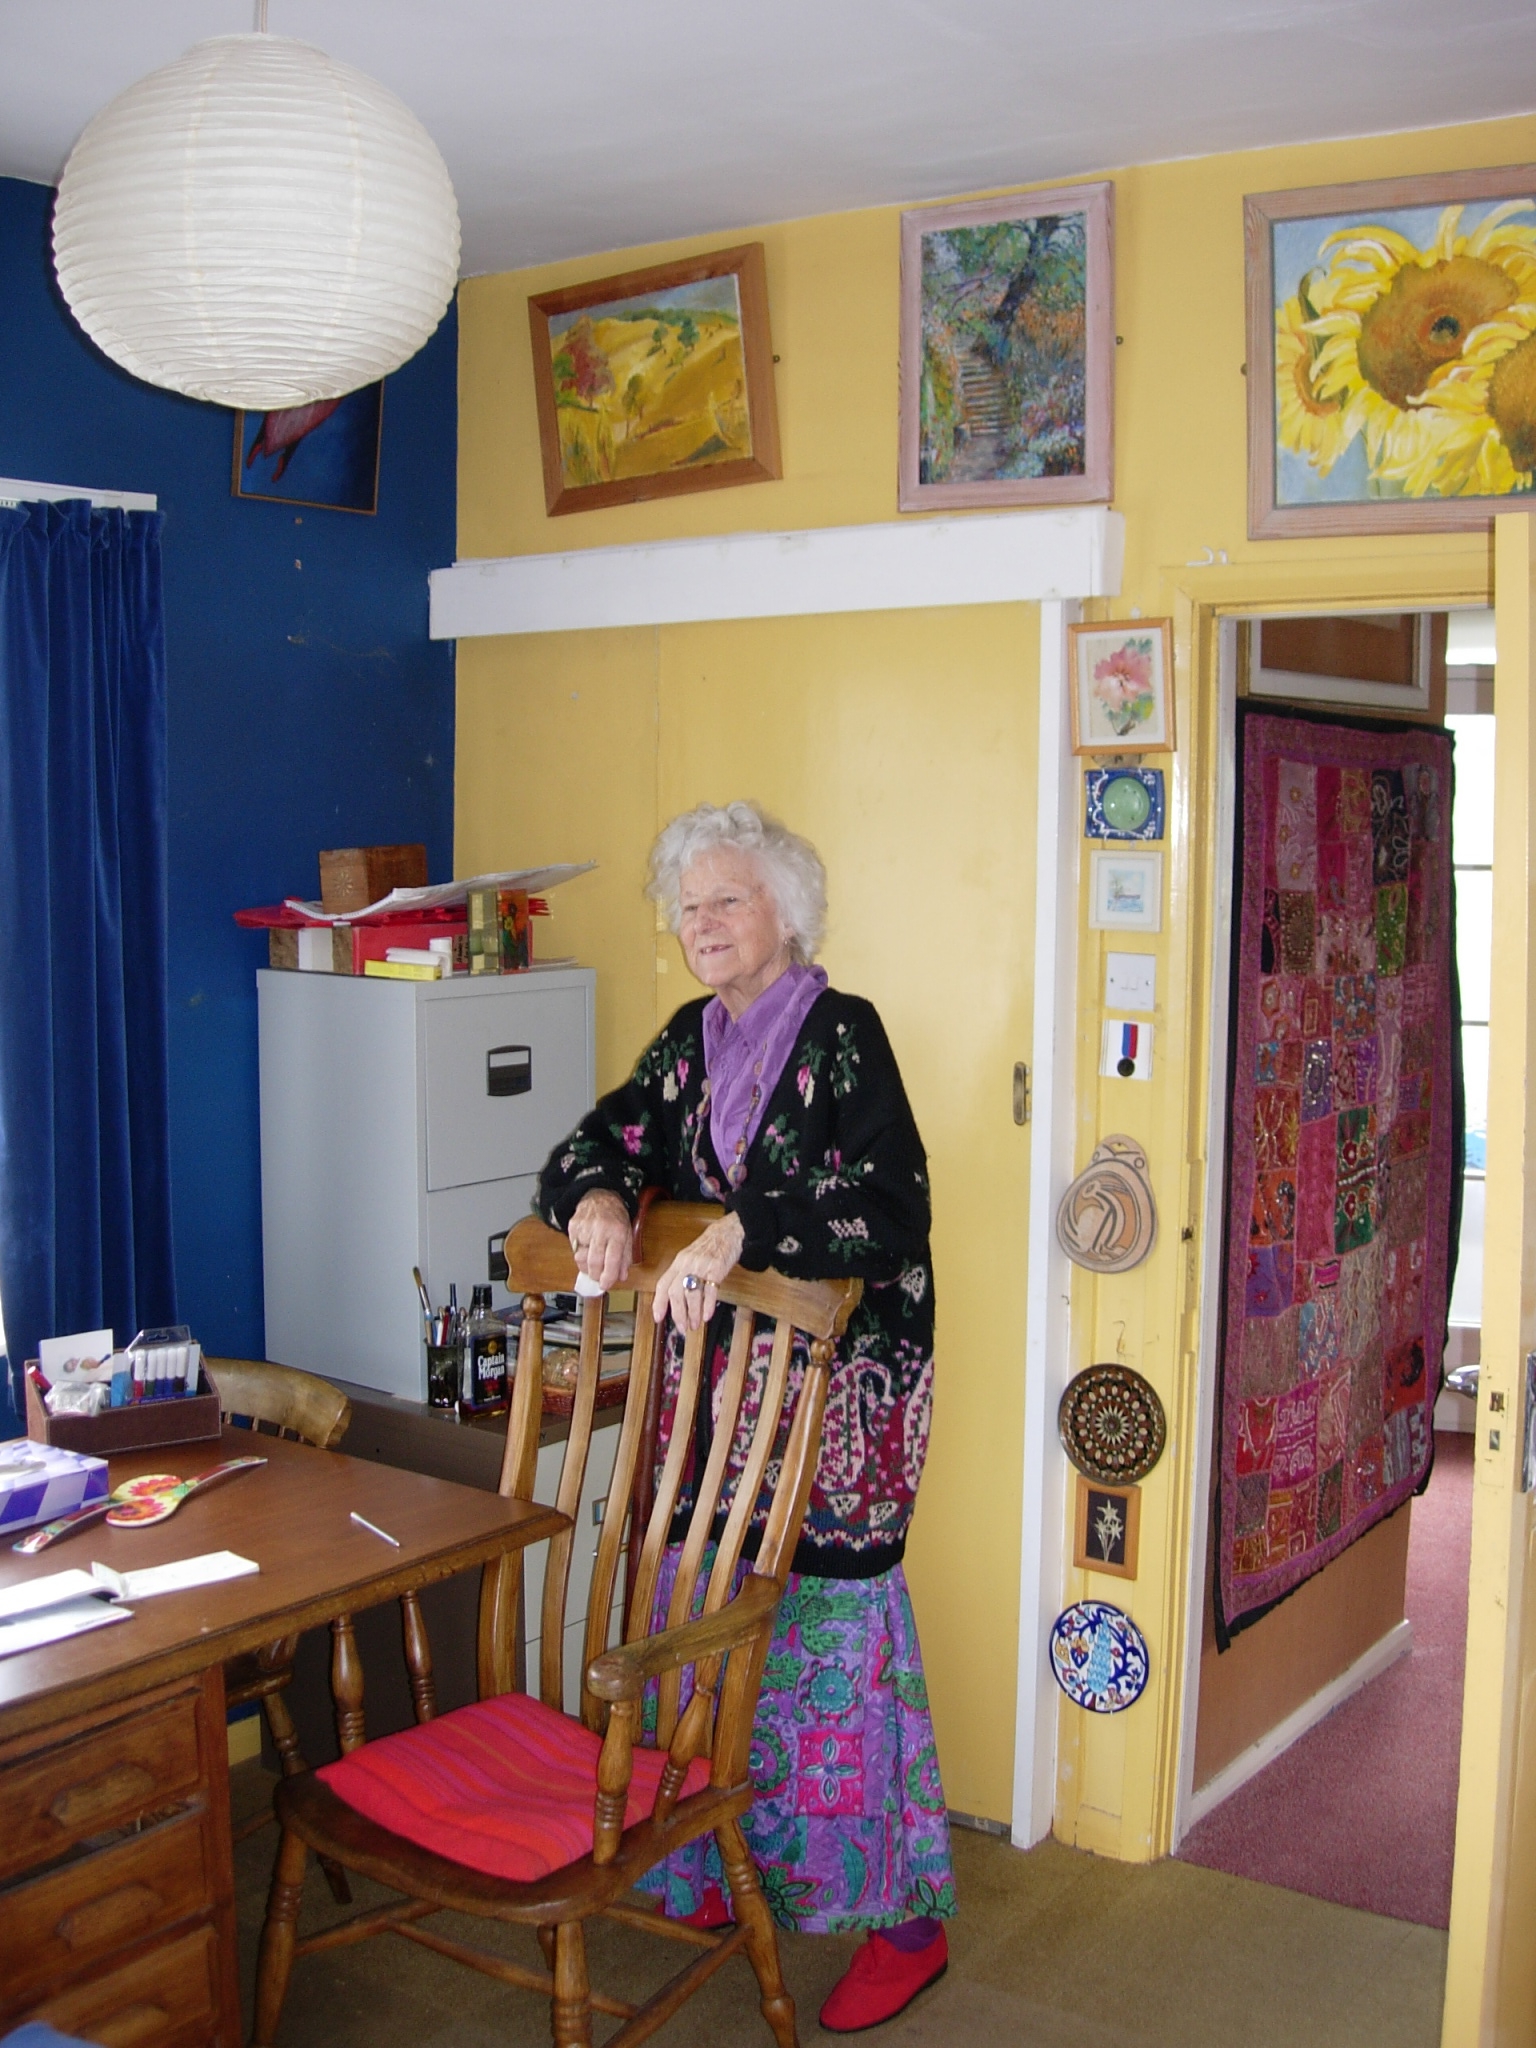 Dora Hurst with her pictures, Penarth, 13 August 2007